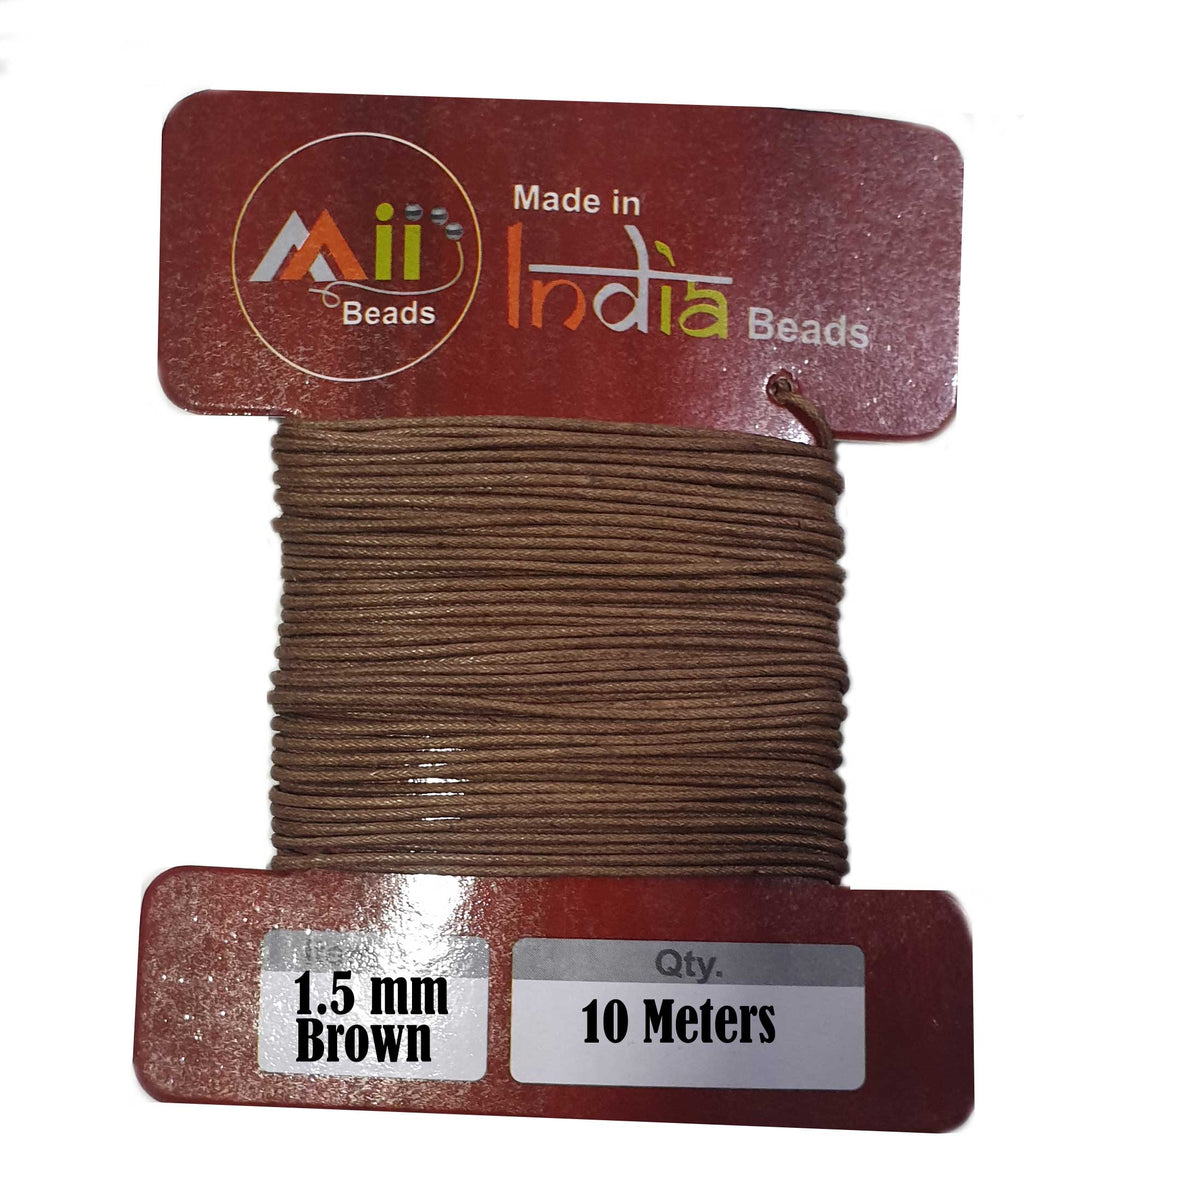 10 Meters Pack 1.5mm Brown Cotton threads cords for beading